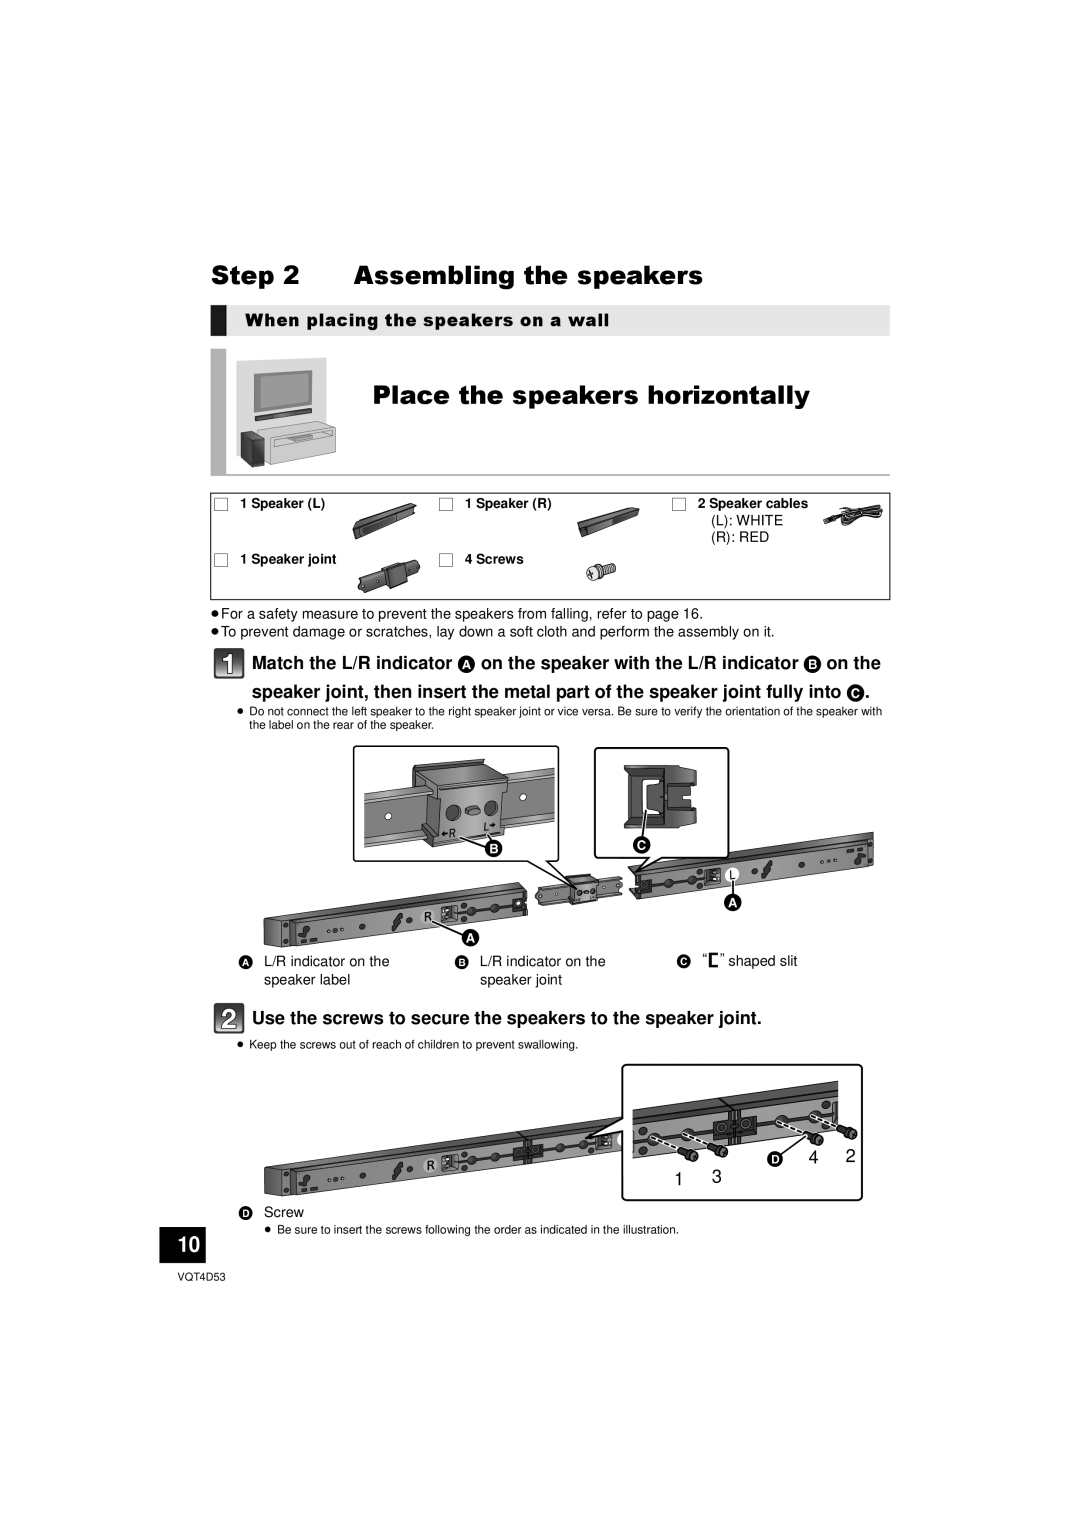 Panasonic SC-HTB20 Assembling the speakers, Place the speakers horizontally, When placing the speakers on a wall,     